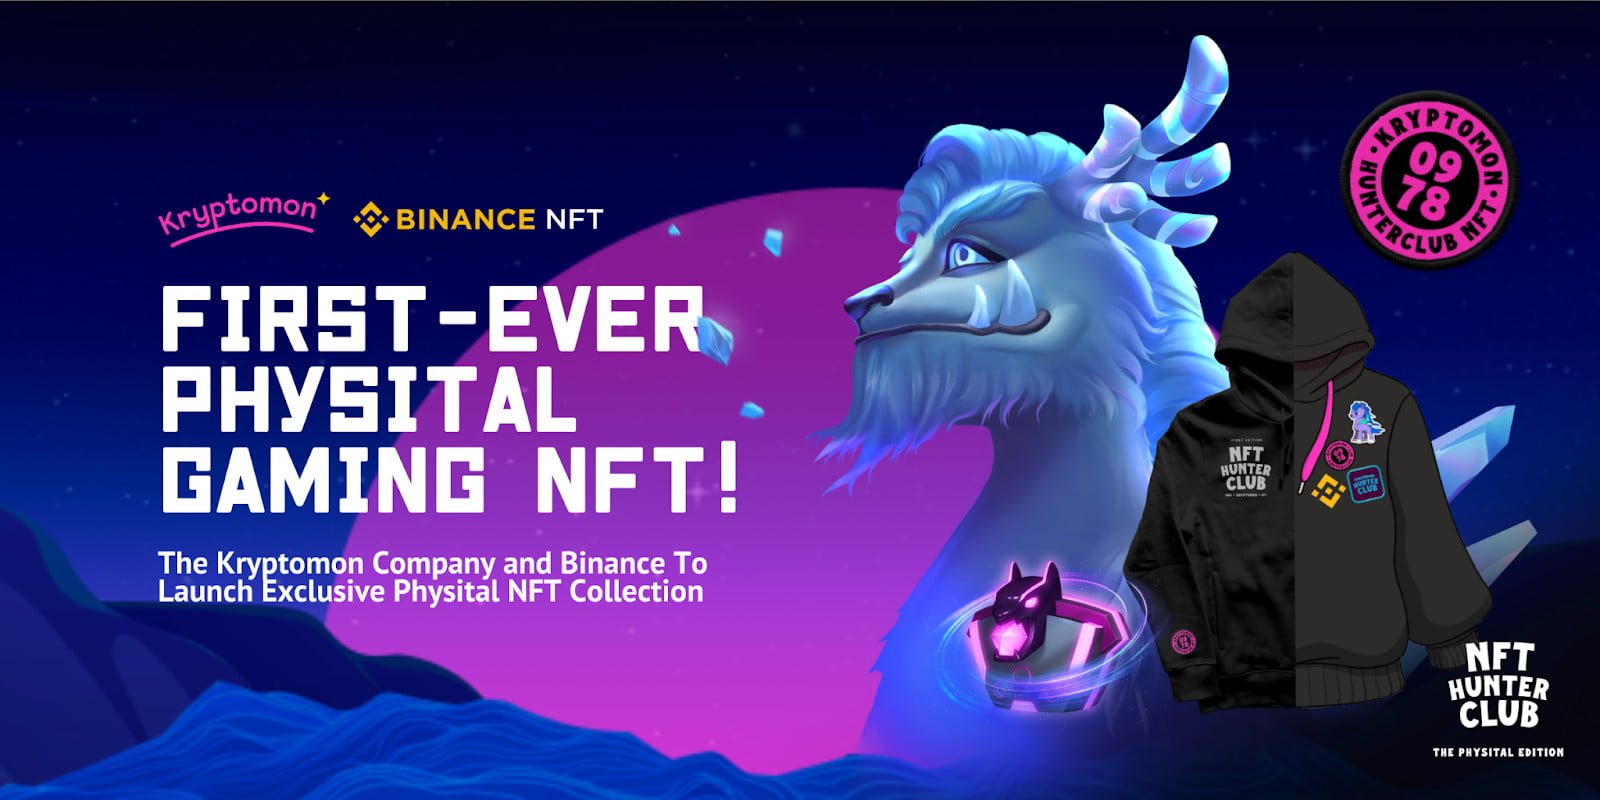 Kryptomon to Launch an Exclusive Physital NFT Collection on Binance NFT 10